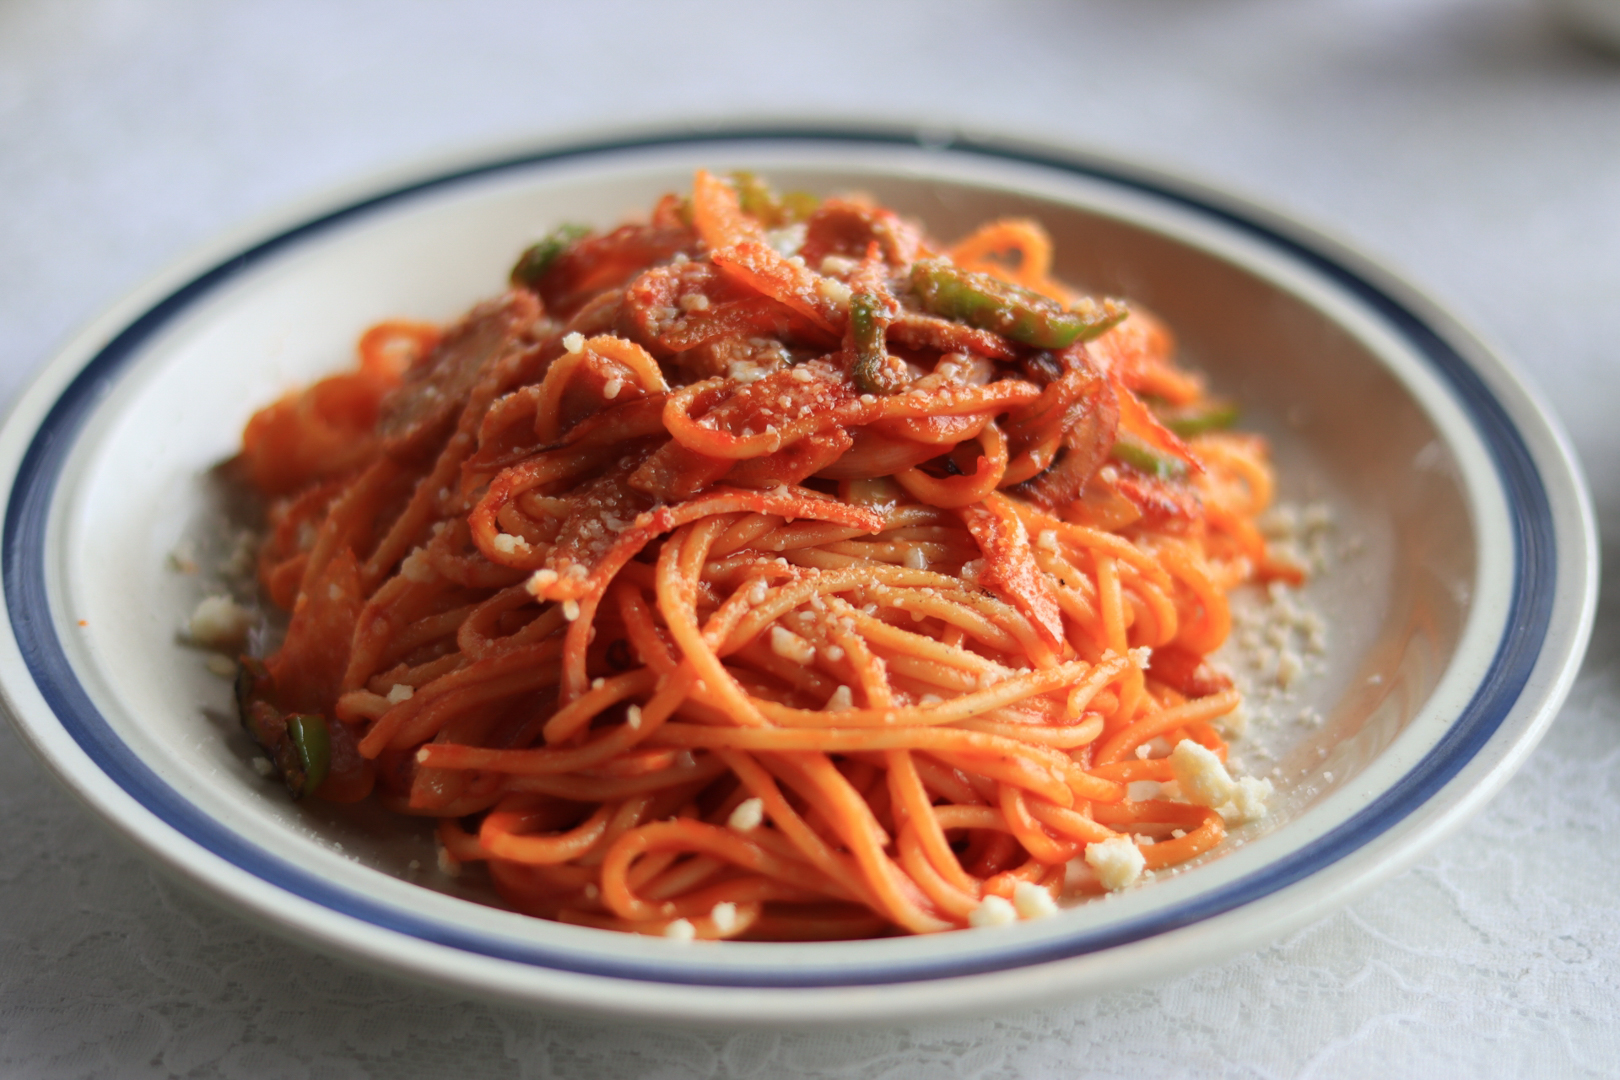 Yoshoku does not mean Western food. In this article, we'll explain the true meaning of yoshoku. Pictured is a plate of Napolitan ketchup spaghetti (pronounced Naporitan in Japan), a yoshoku dish.